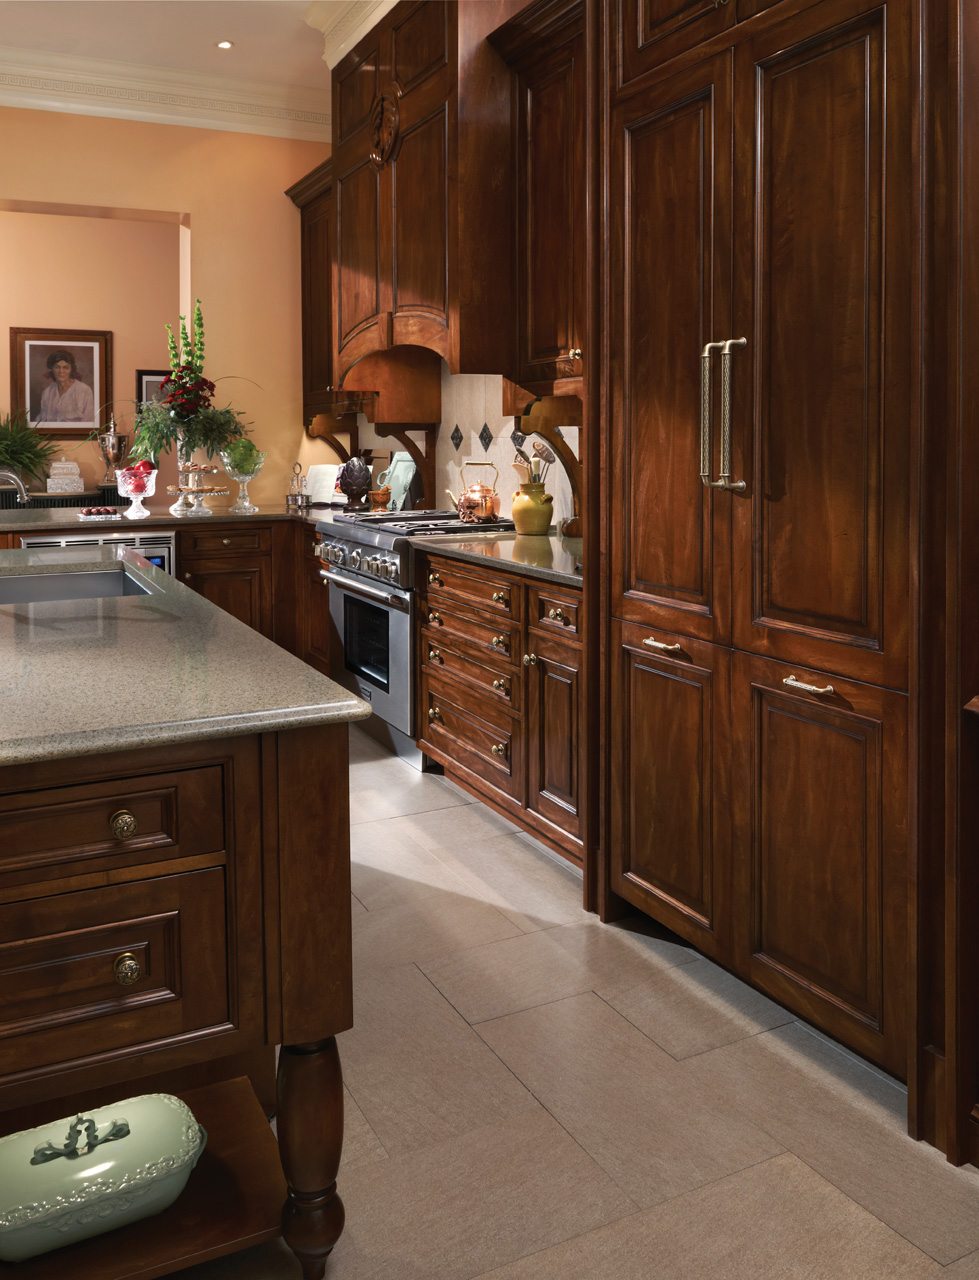 Luxury Kitchen in Wood Mode Cabinetry